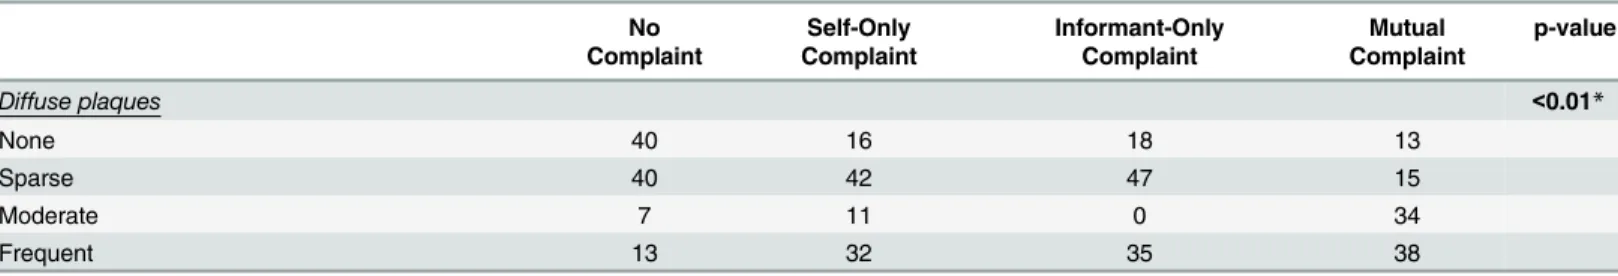 Table 1. (Continued) No Complaint Self-Only Complaint Informant-OnlyComplaint Mutual Complaint p-value Diffuse plaques &lt; 0.01 * None 40 16 18 13 Sparse 40 42 47 15 Moderate 7 11 0 34 Frequent 13 32 35 38